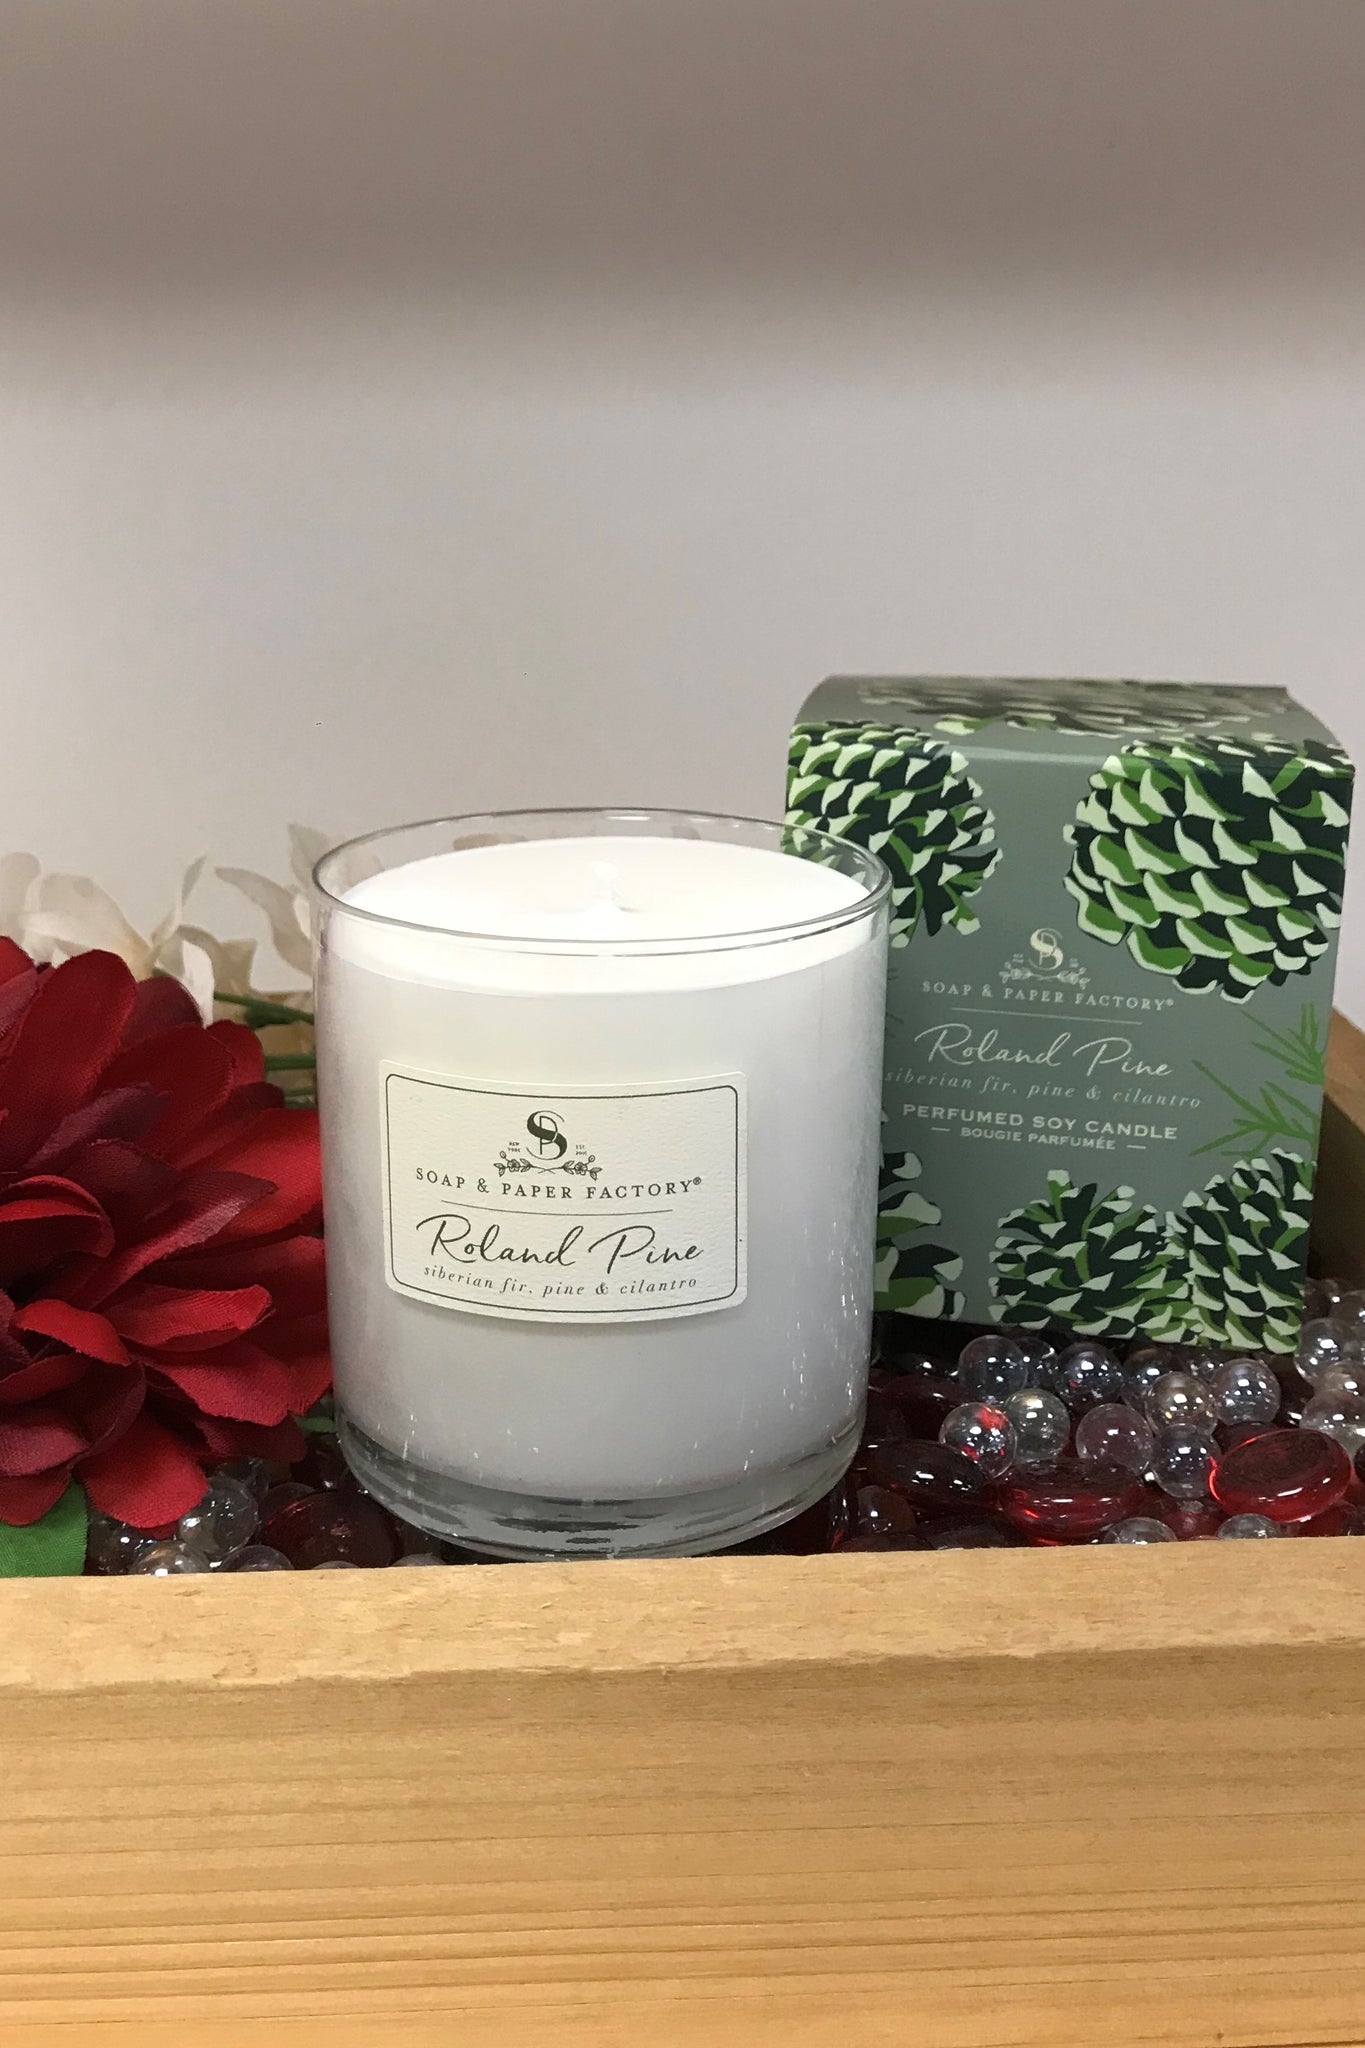 S&P Pine Large Soy Candle